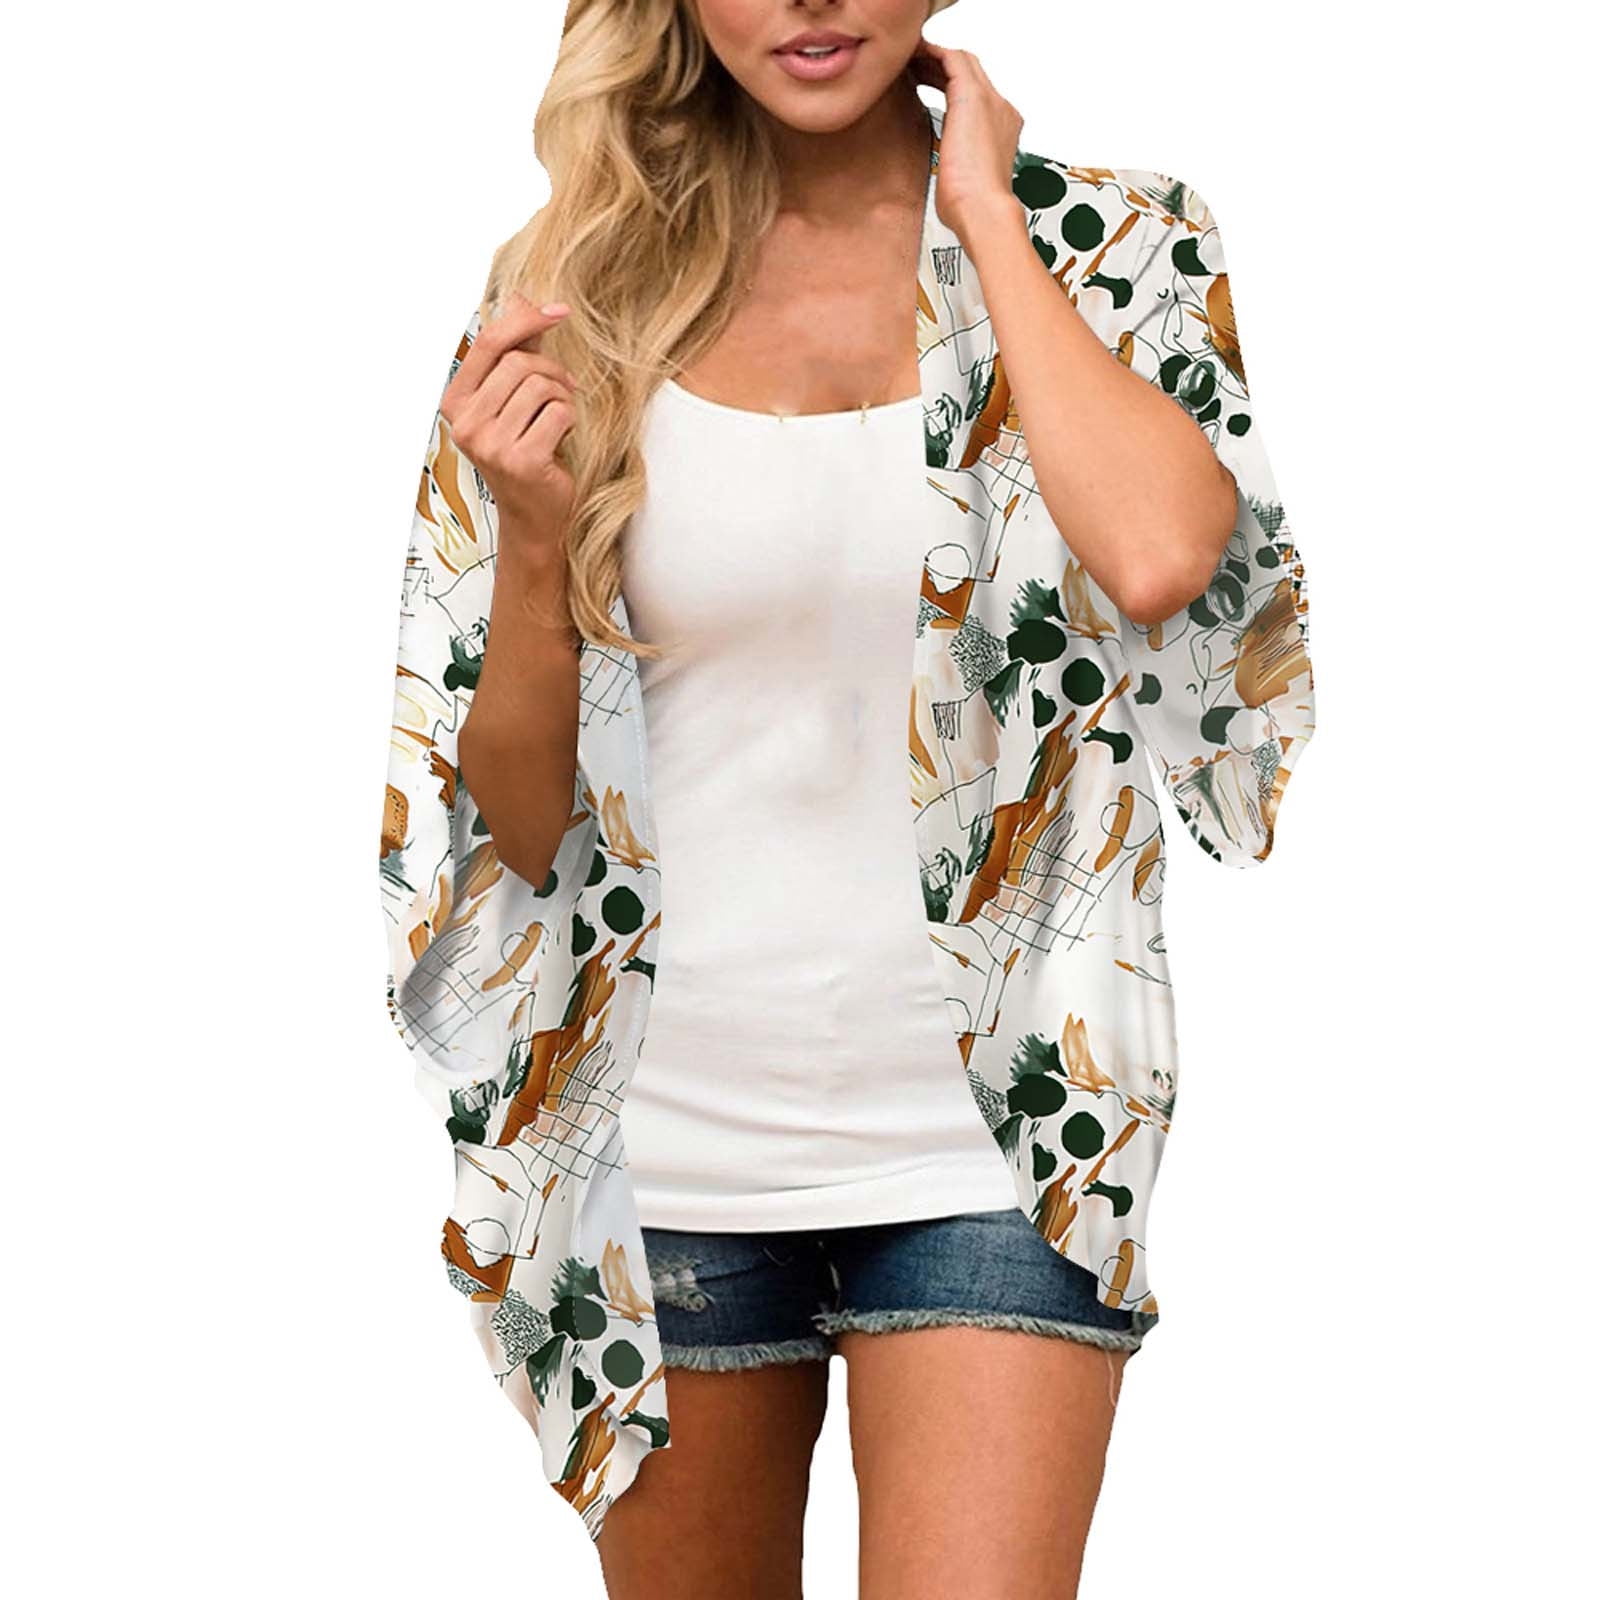 PRETTODAY Women's Summer Floral Print Kimonos Loose Half Sleeve Chiffon Cardigan Blouses Casual Cover Up 